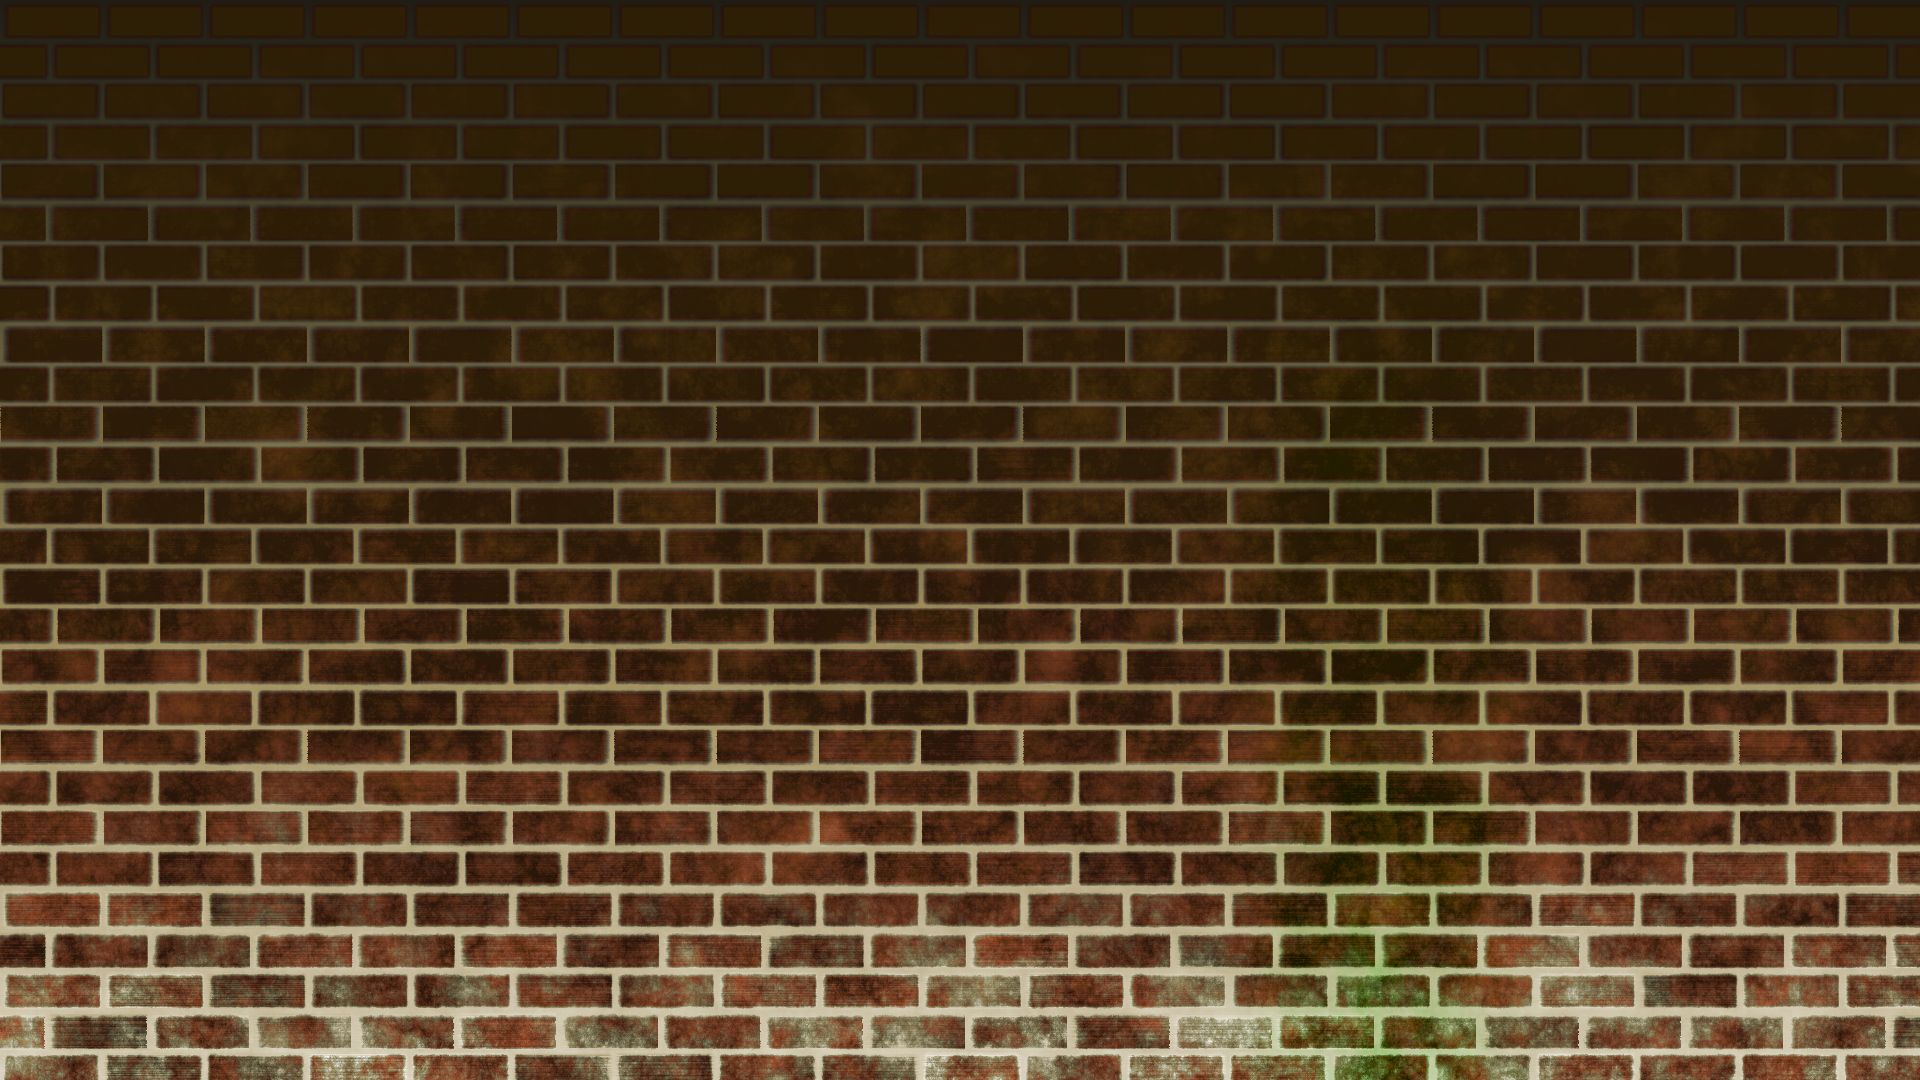 Now the effects all come together to give a realistic wall 1920x1080